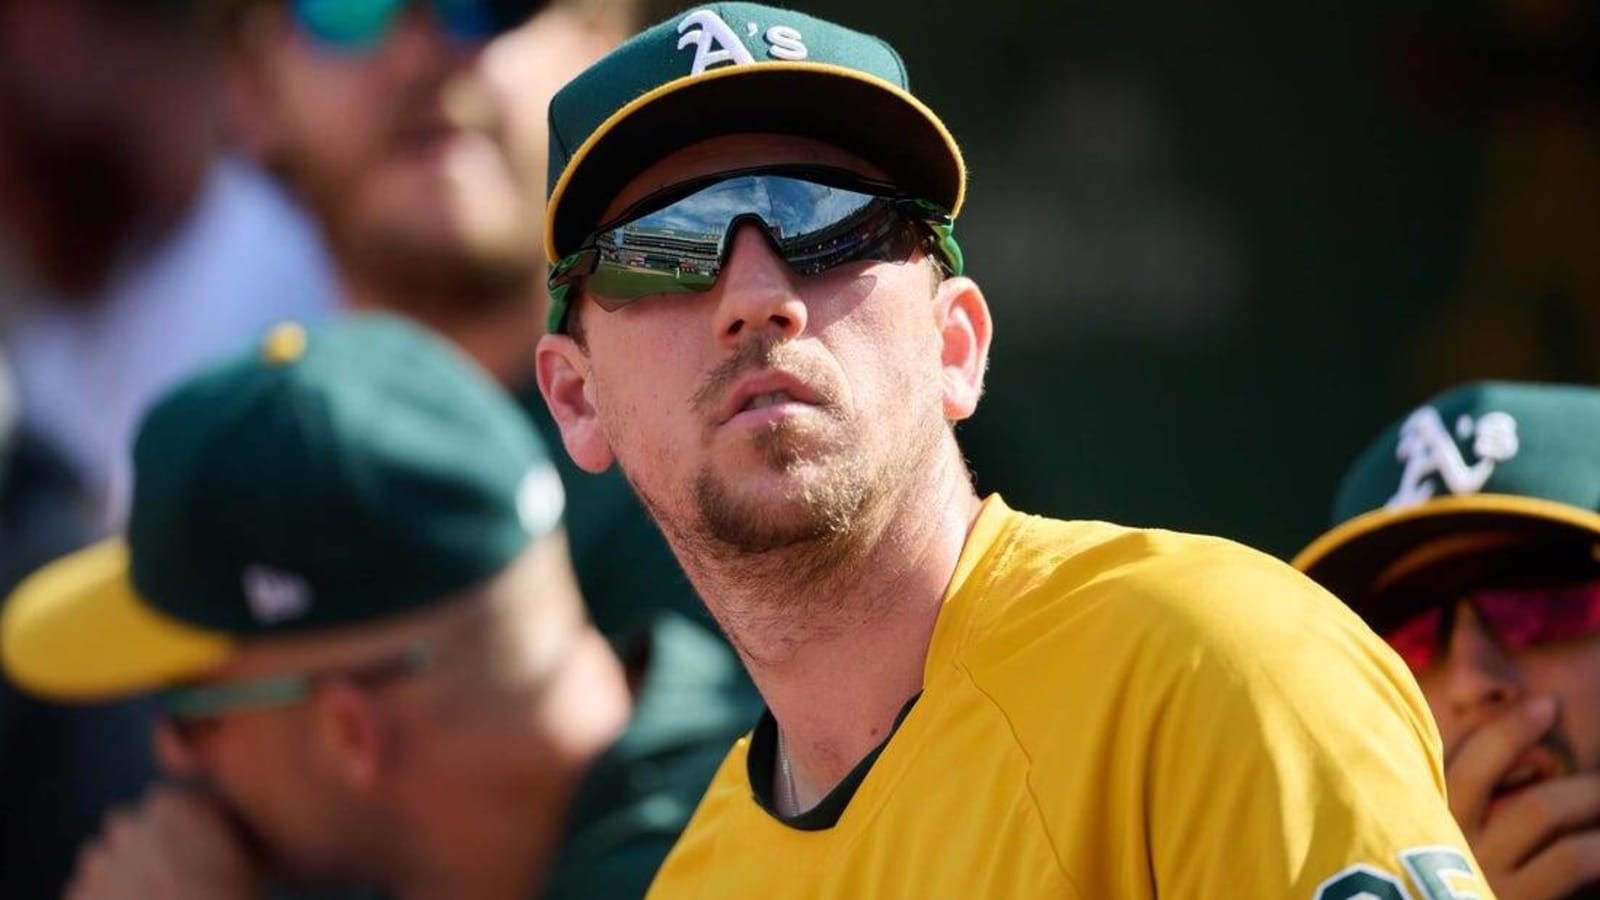 Athletics activate OF Stephen Piscotty (calf) off IL